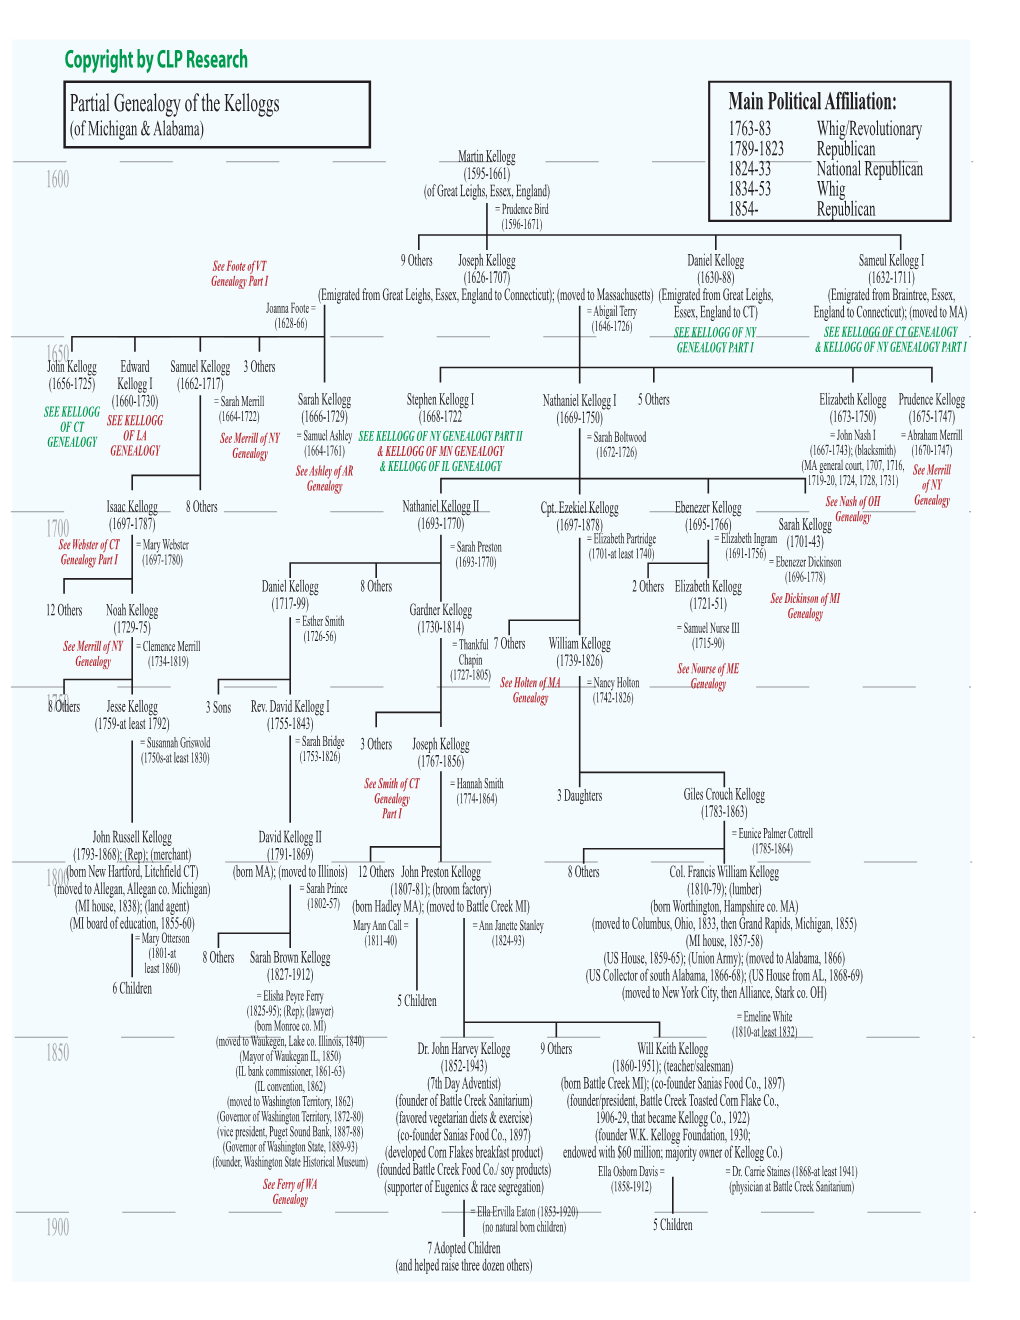 Copyright by CLP Research 1600 1700 1750 1800 1850 1650 1900 Partial Genealogy of the Kelloggs Main Political Affiliation